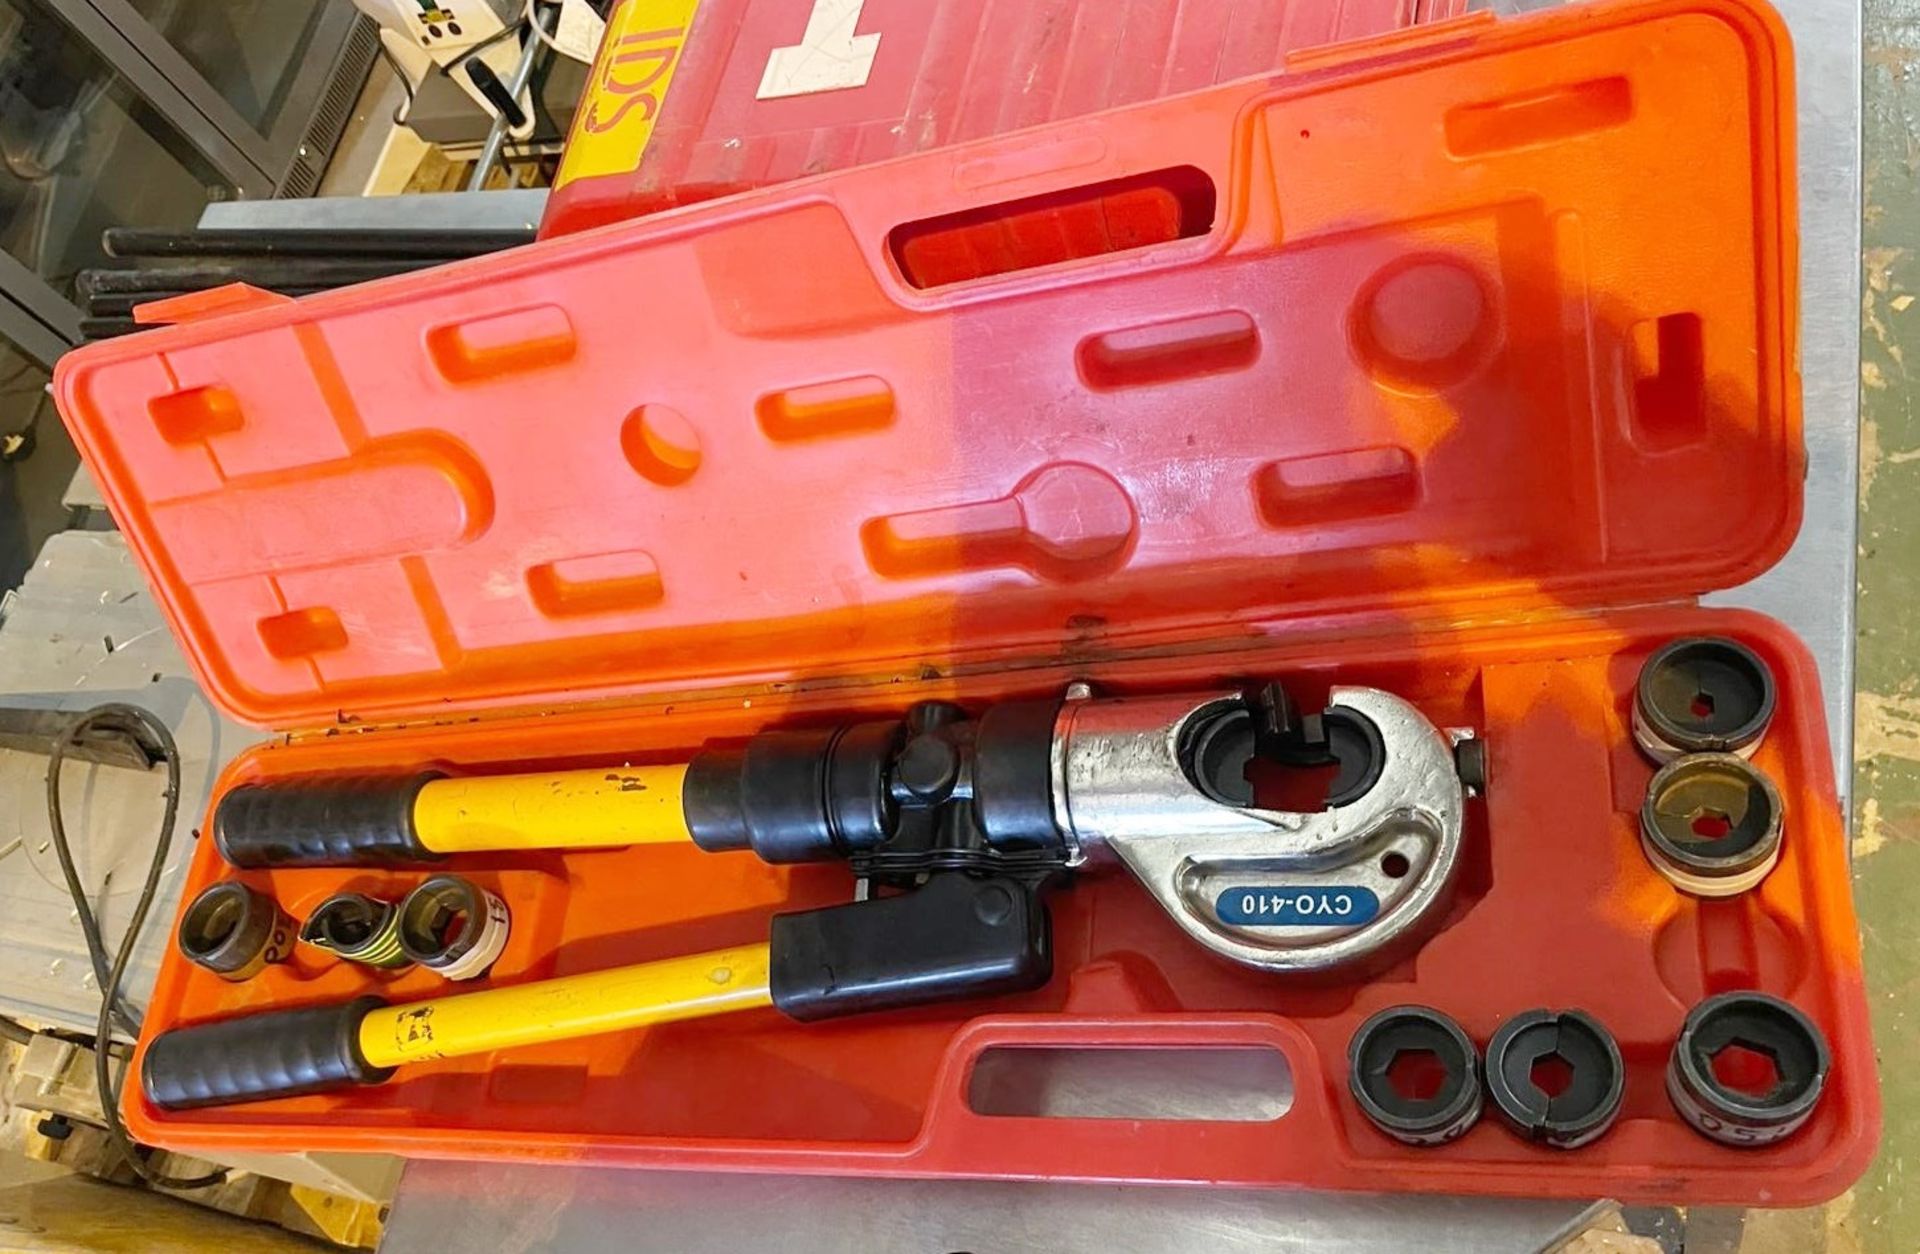 1 x Manual Hydraulic Crimping Tool - Type: CYO-410 - Includes Case and Accessories - RRP £750